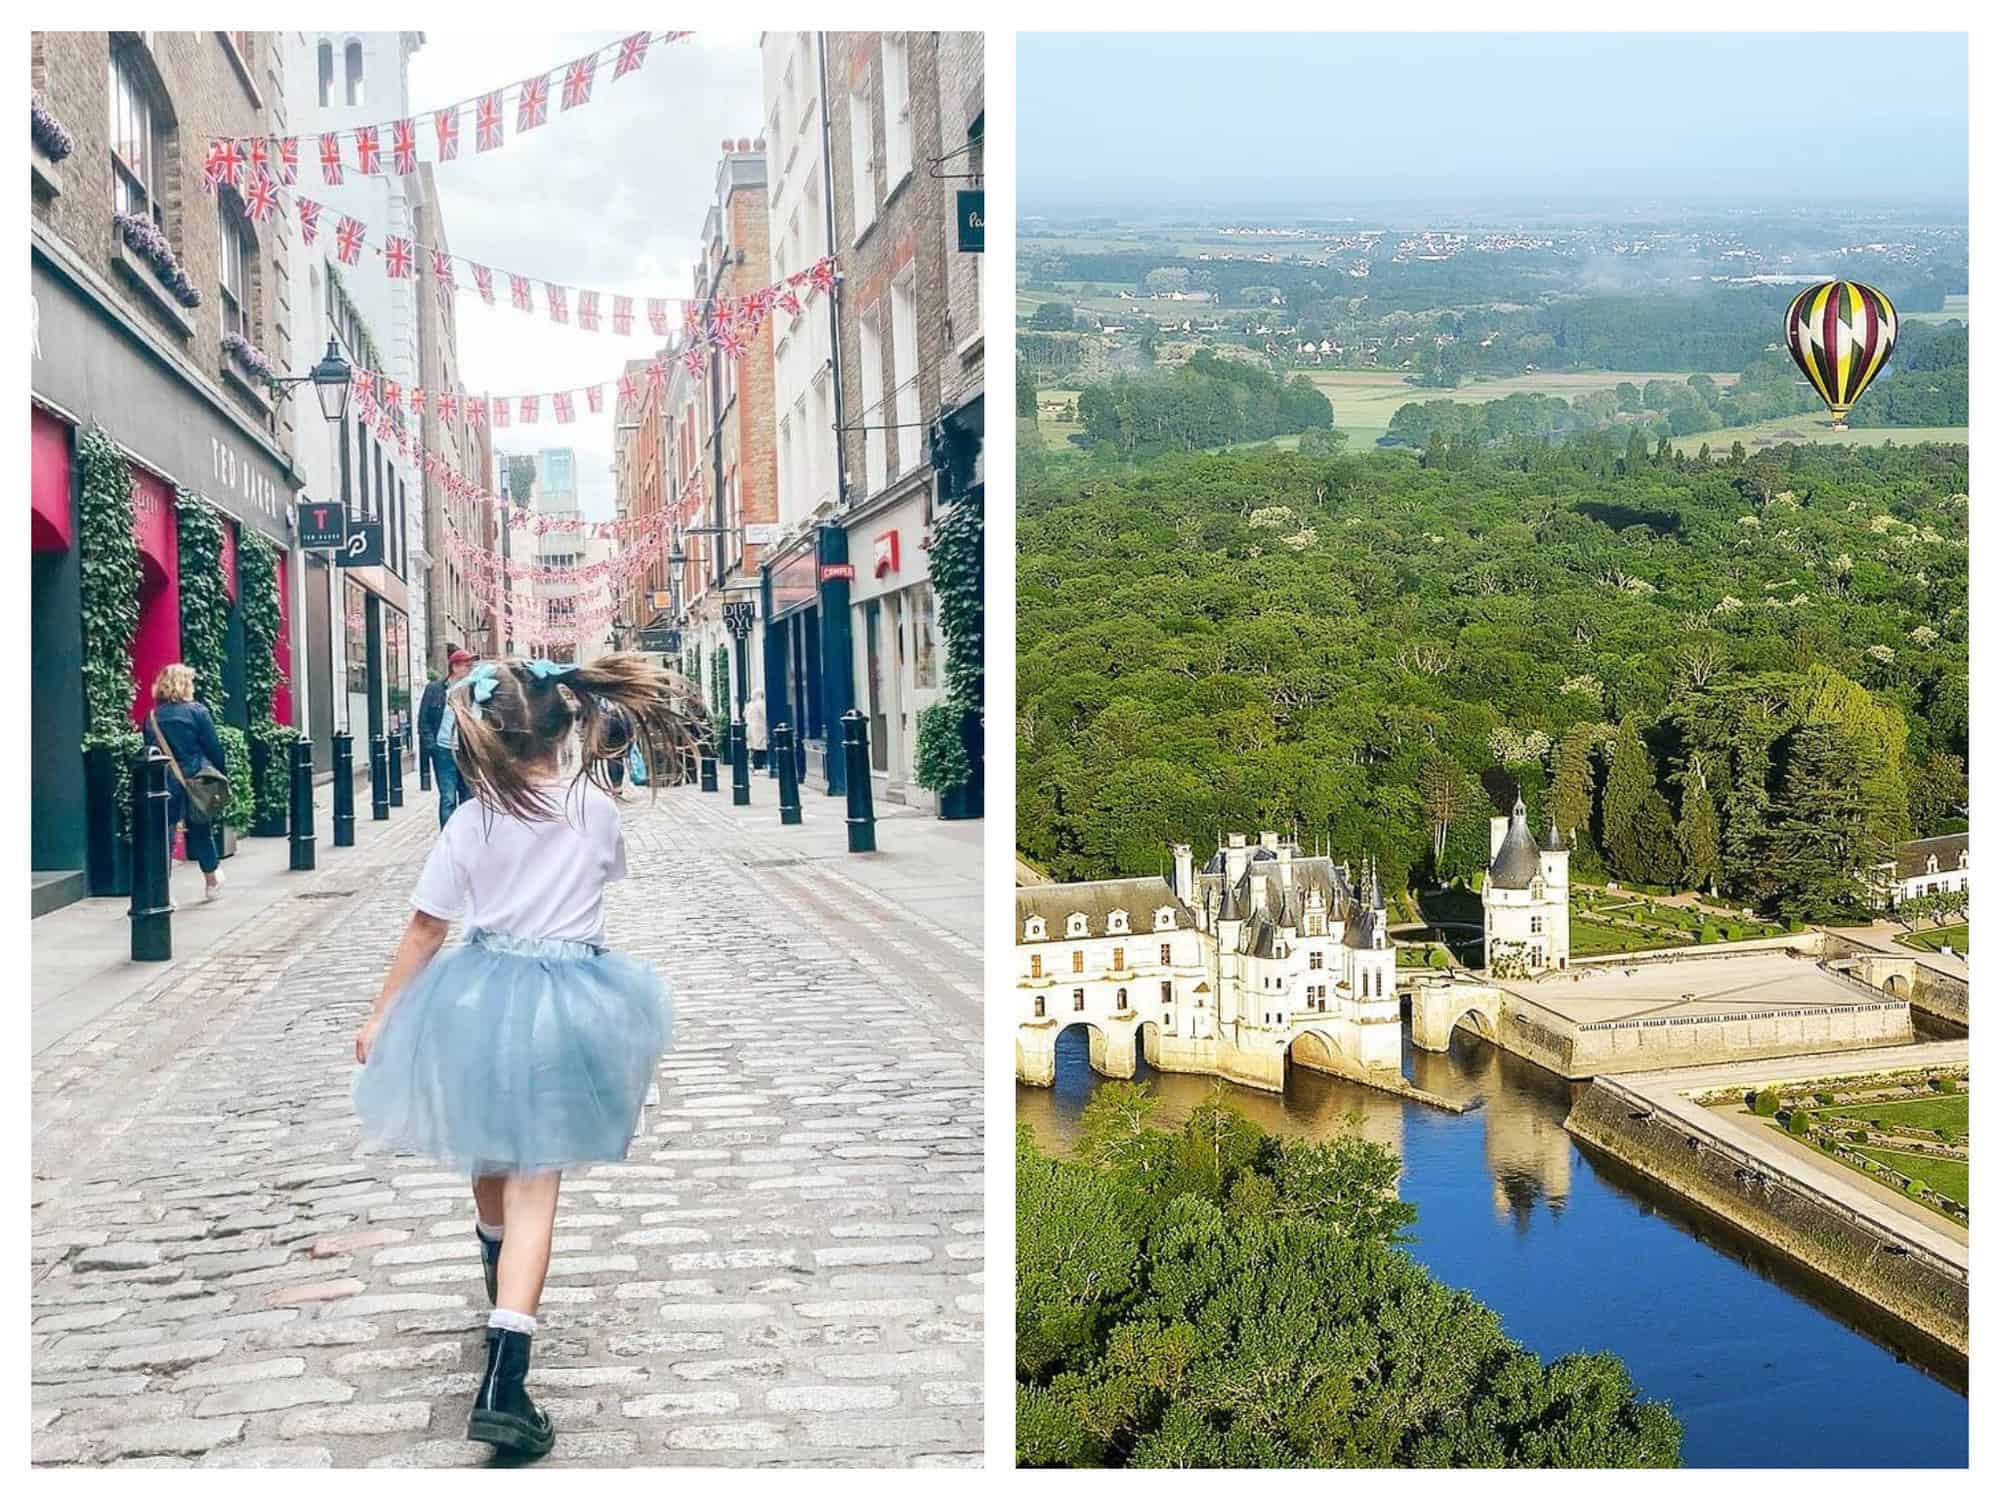 Left: A girl in a blue skirt is running in a cobbled street. Right: A hot air balloon is flying over a castle, a river, and a forest.